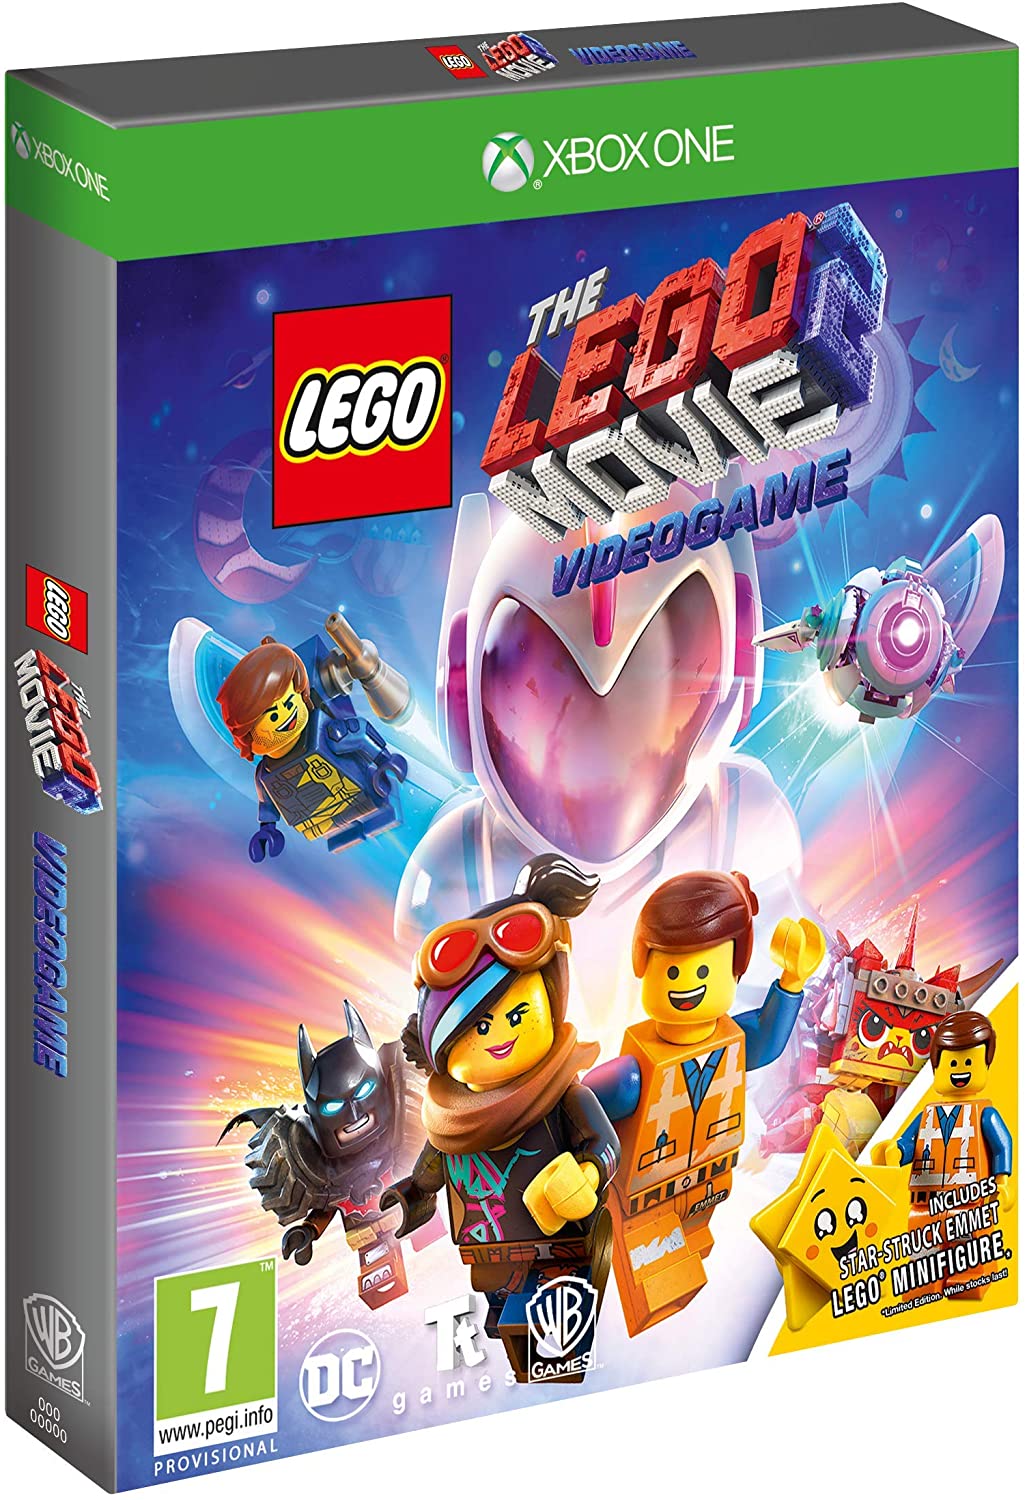 The LEGO Movie 2 Videogame Minifigure Edition (Xbox One)